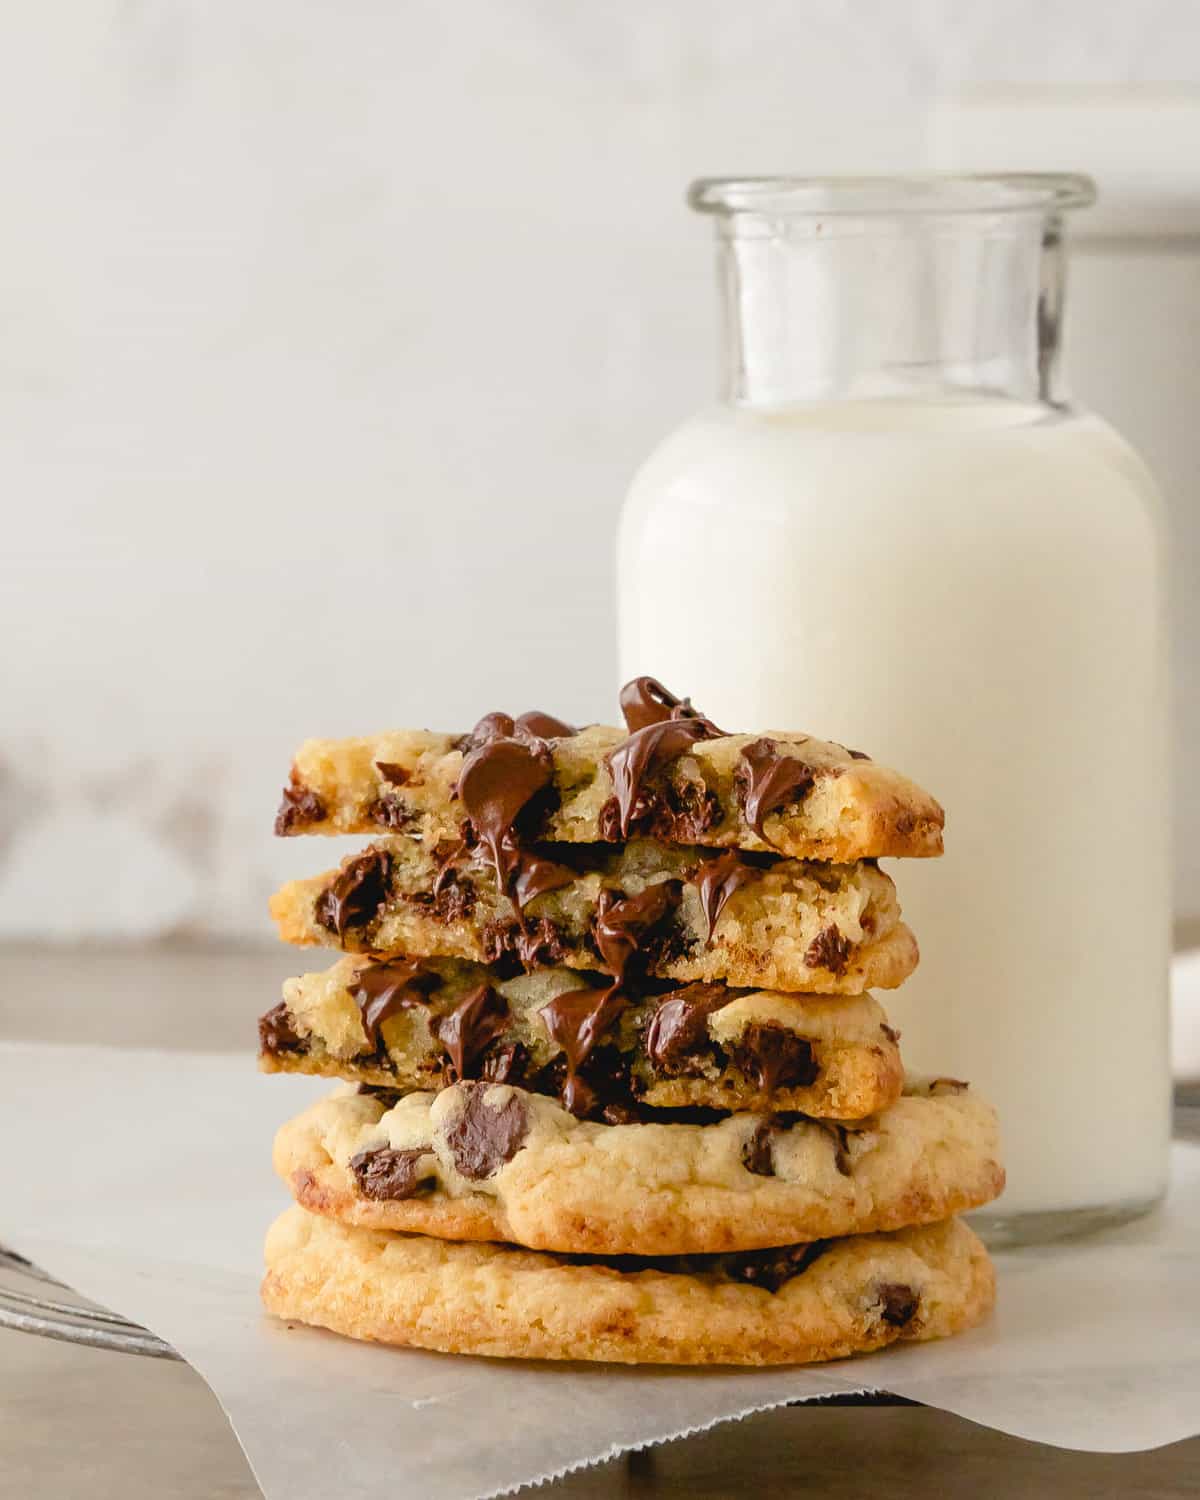 Chocolate Chip Cookies without Brown Sugar stacked on a plate.